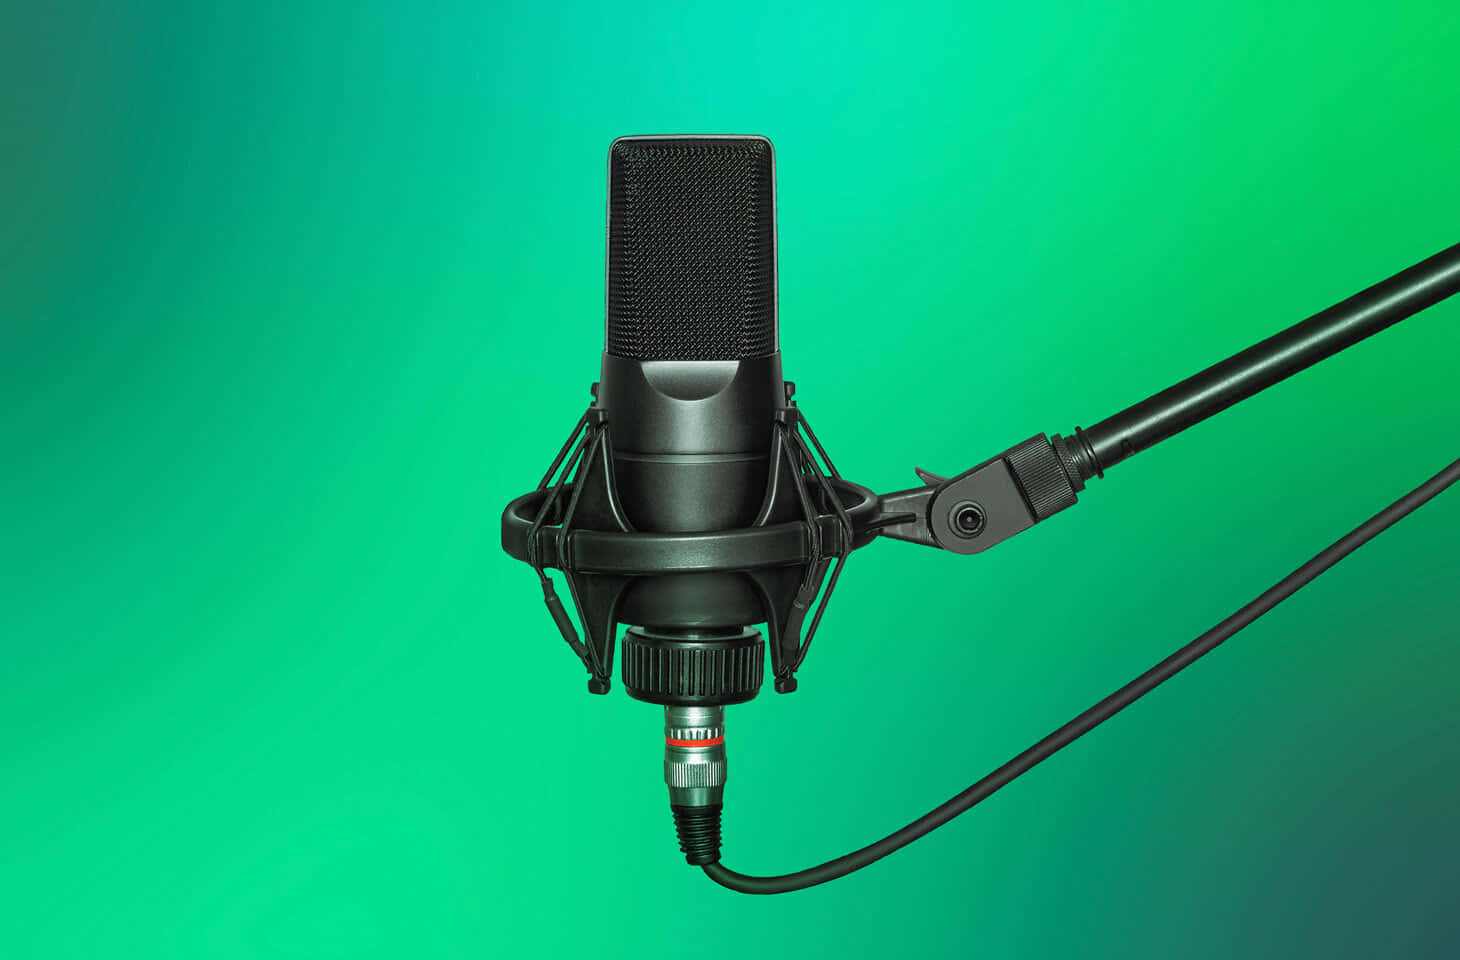 Engaging Microphone Setup for Podcasting